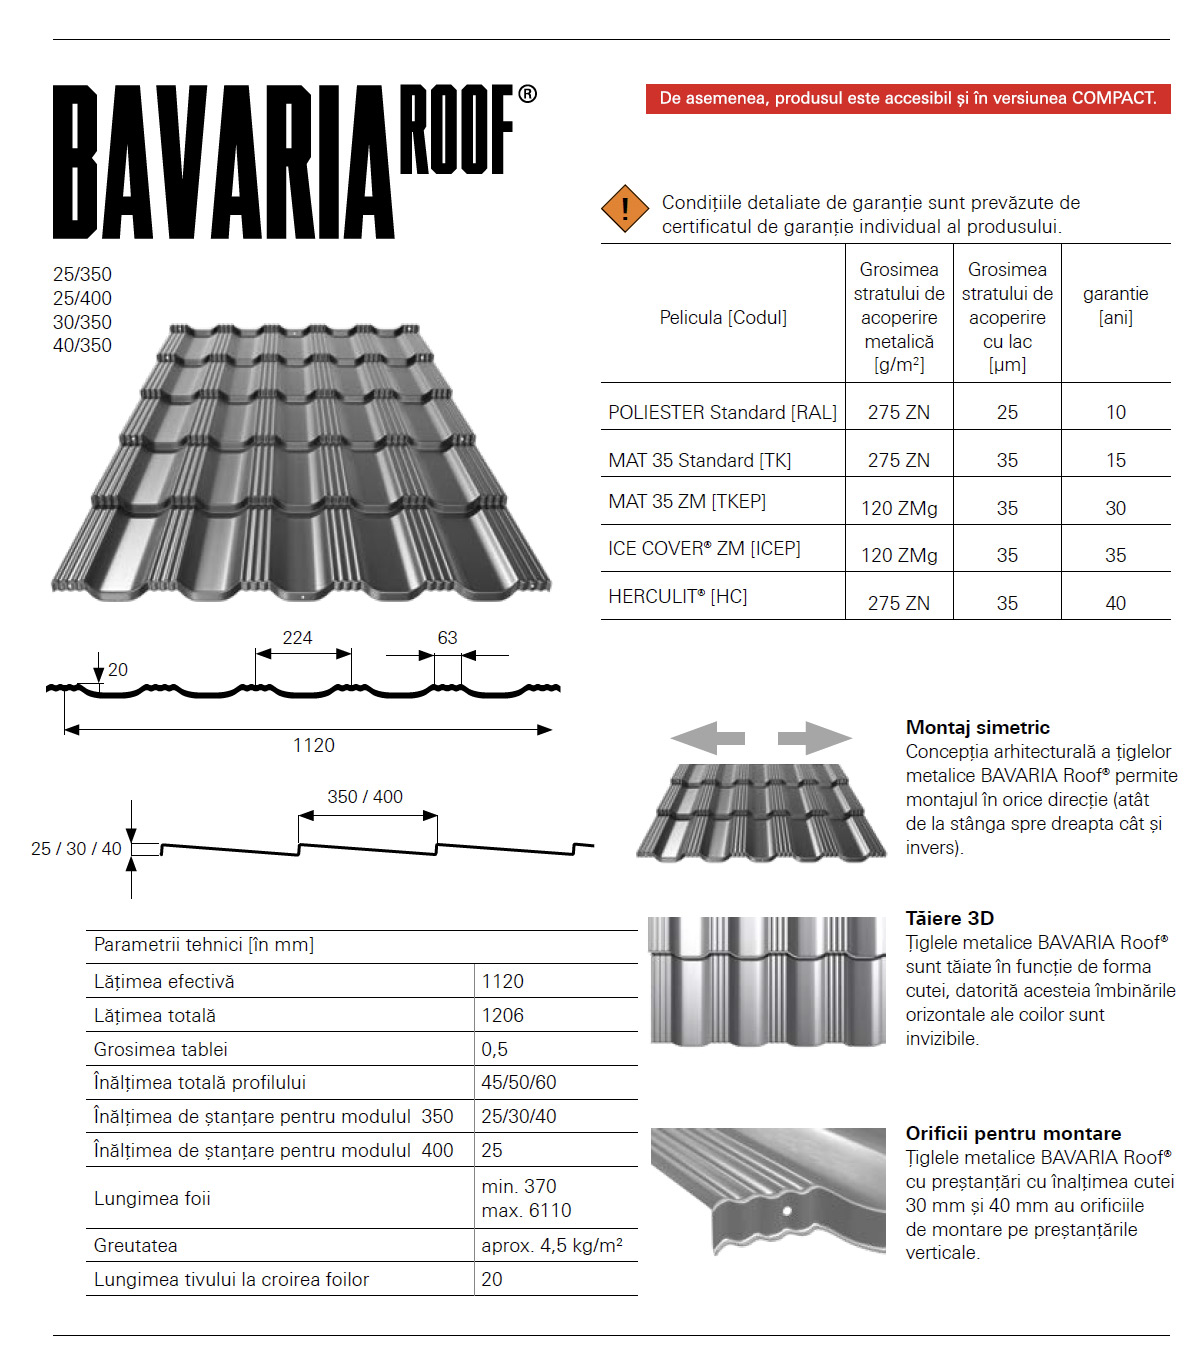 BAVARIA ROOF 30 Ice Cover